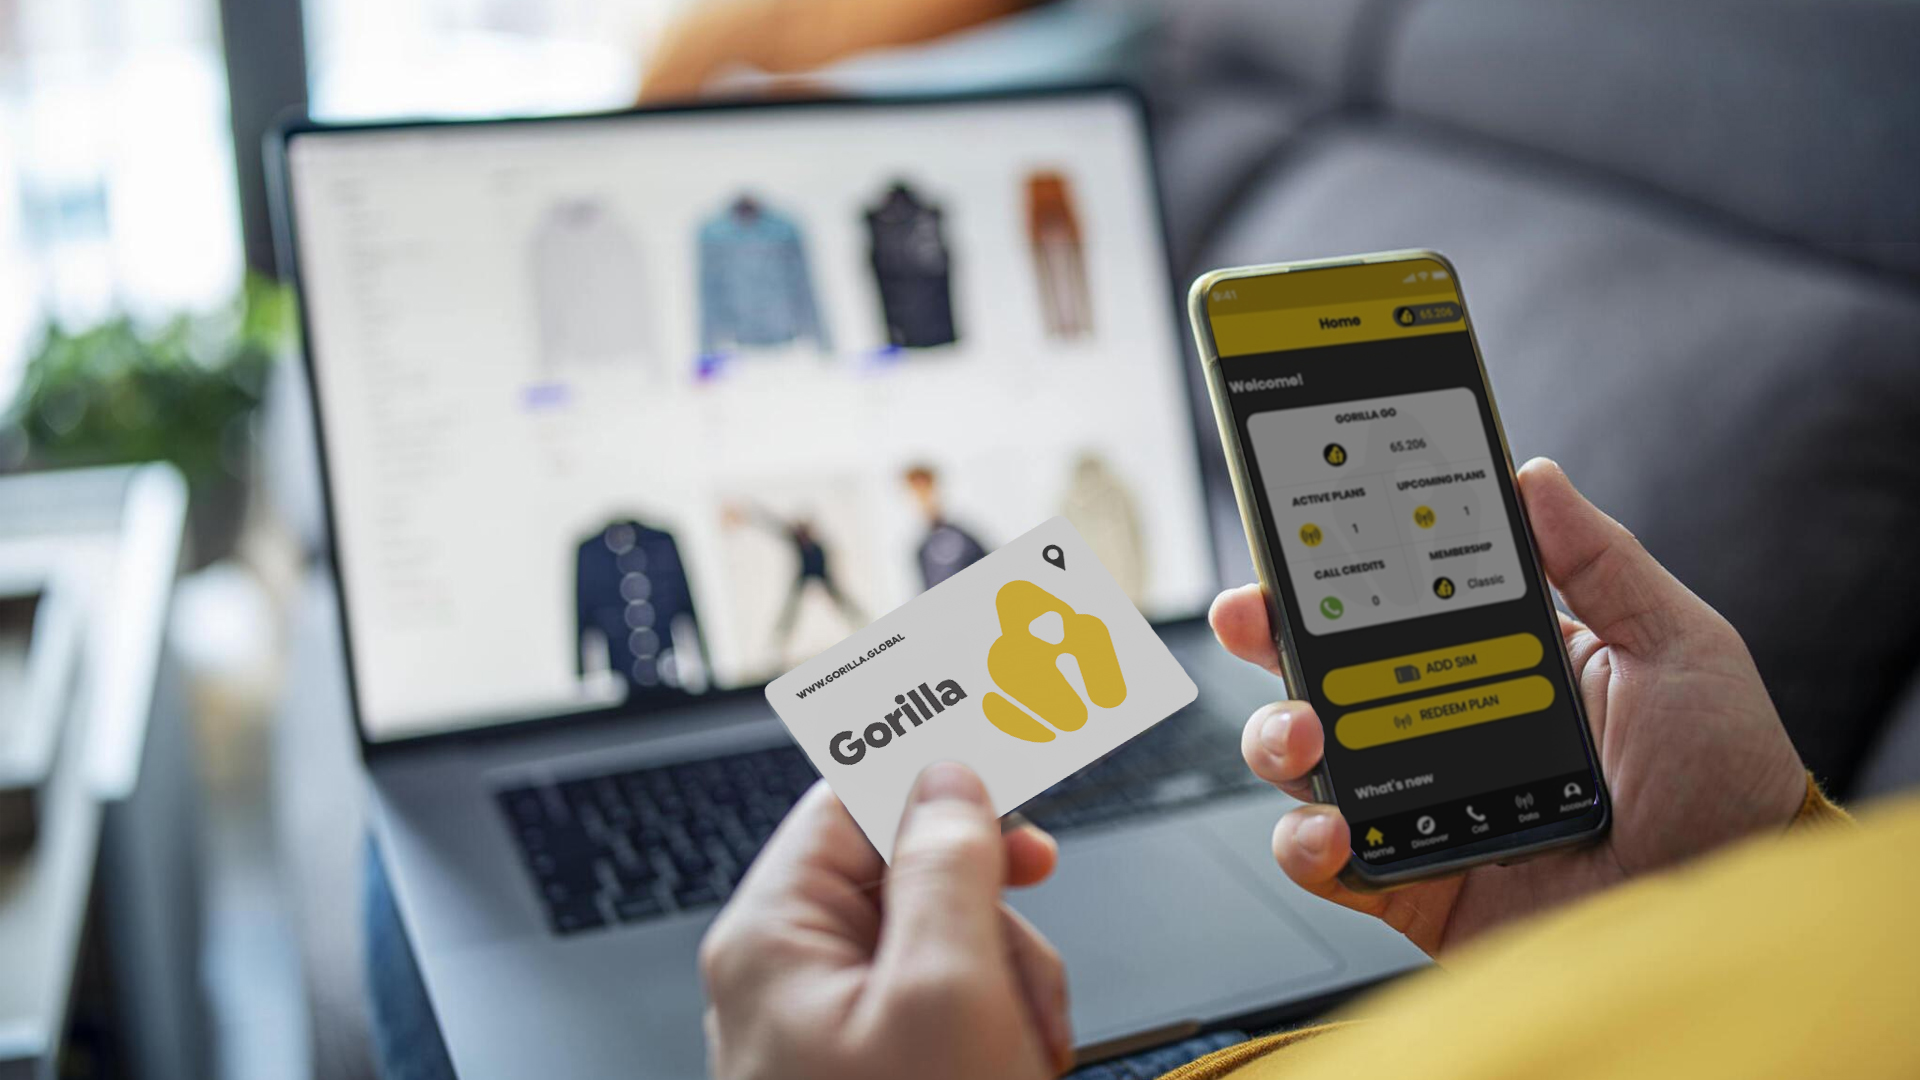 Gorilla Mobile partners with companies in Singapore to offer e-vouchers